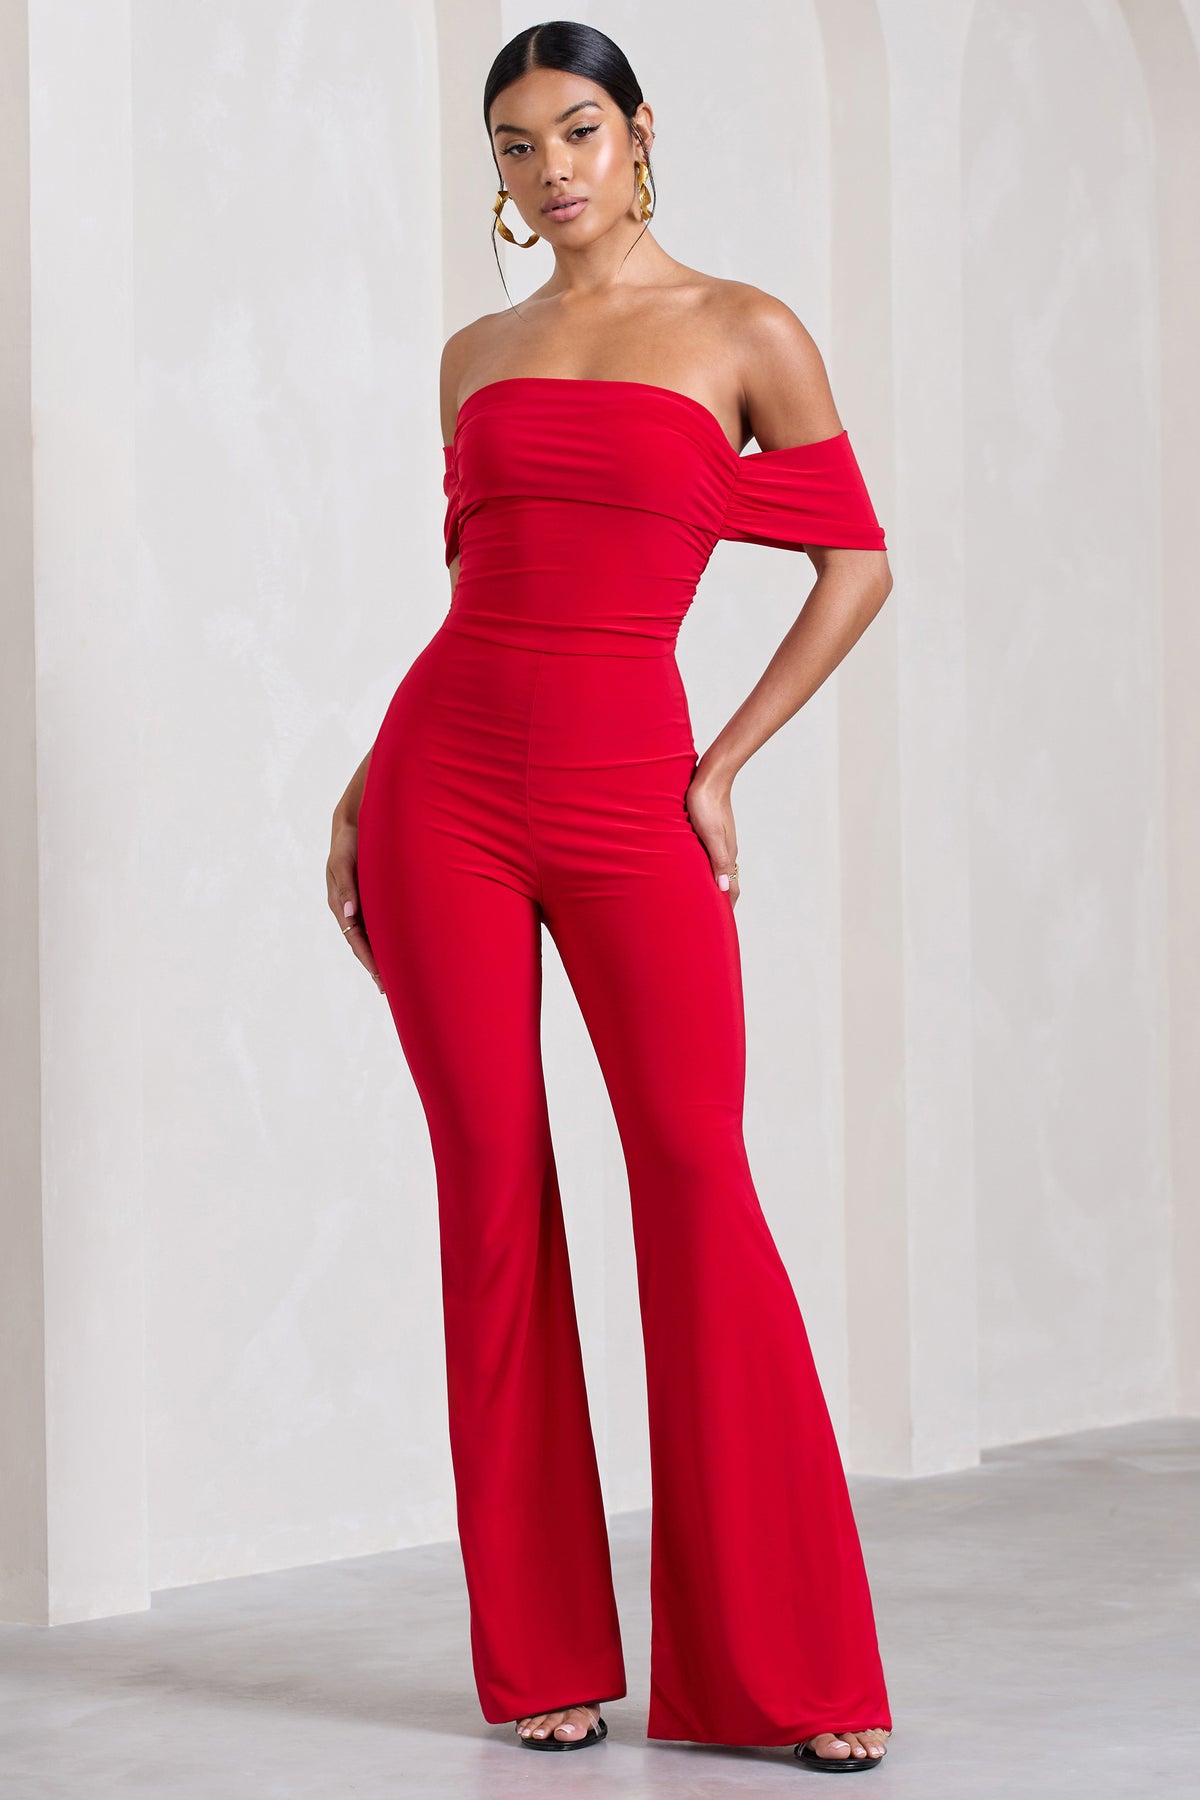 Red jumpsuits